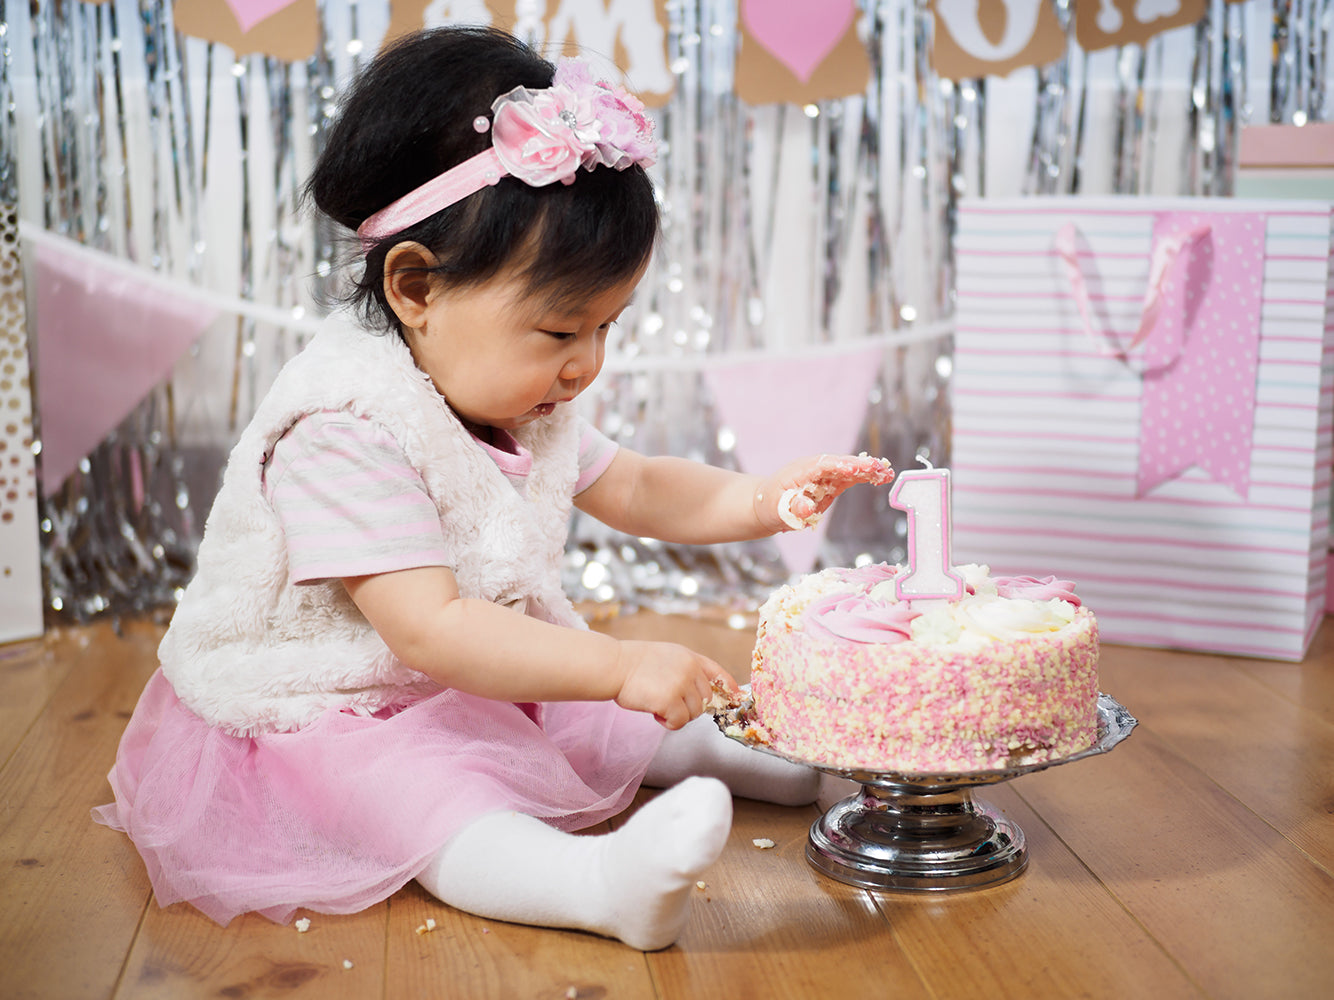 Baby Girl sitting on the floor with a cake and Celebrating First Birthday